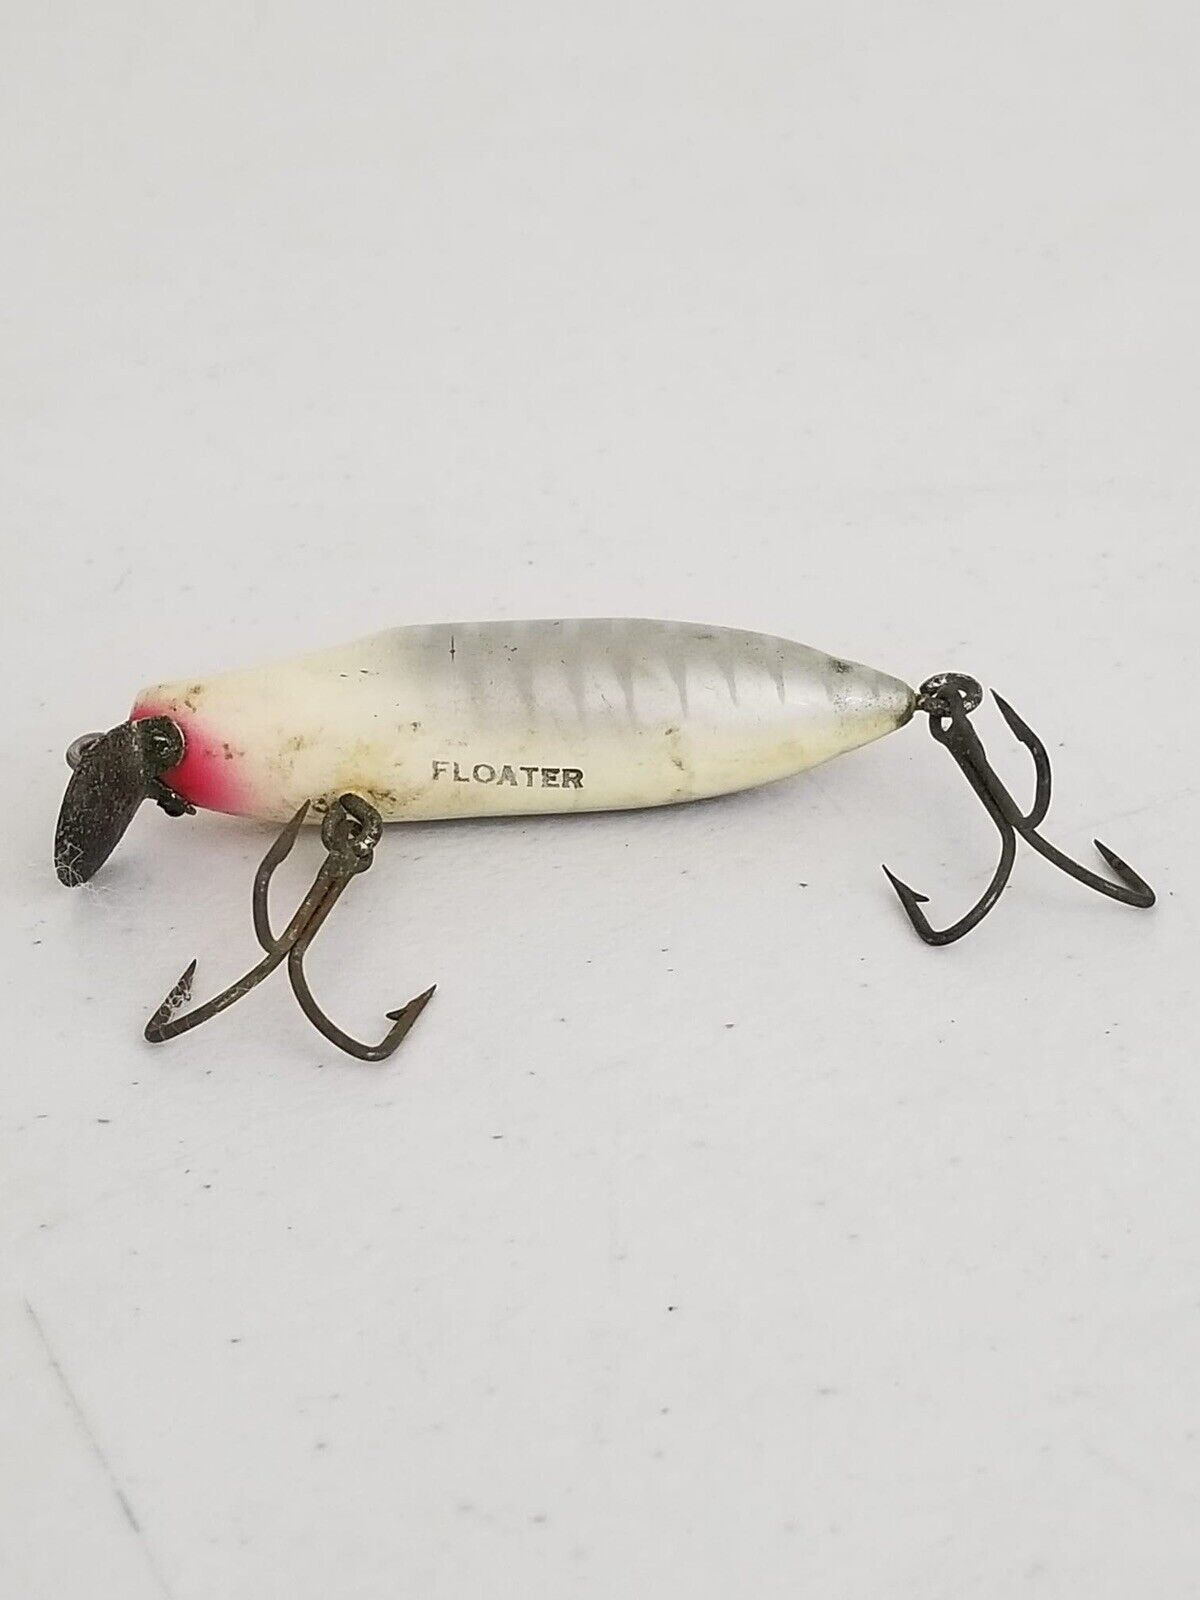 Rare Vintage Red & White Floating Fishing Lure with Dual Treble Hooks - Collectible Angler's Delight - TreasuTiques